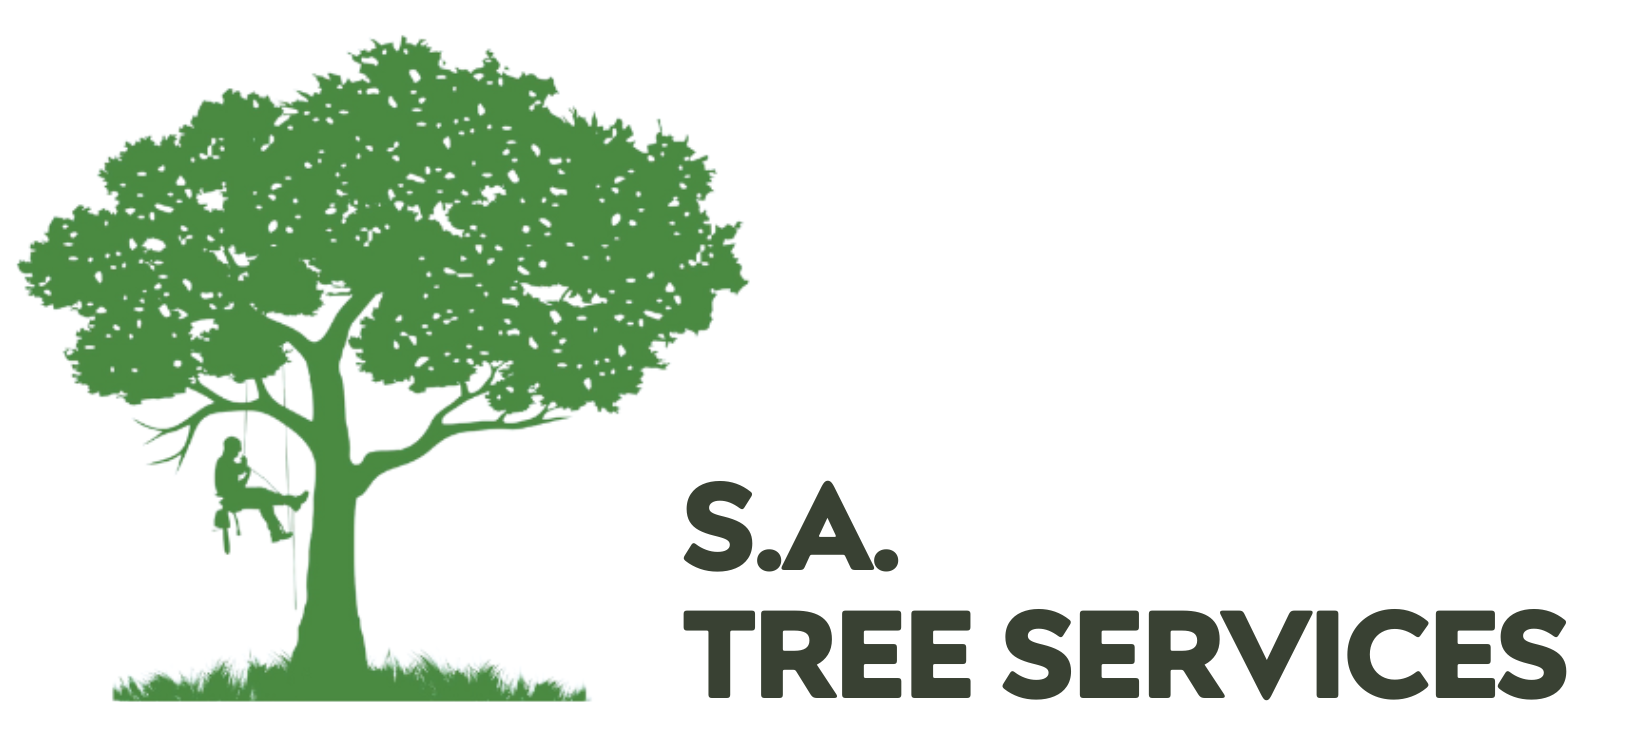 S.A. Tree Services Adelaide,South Australia Tree removal,Pruning